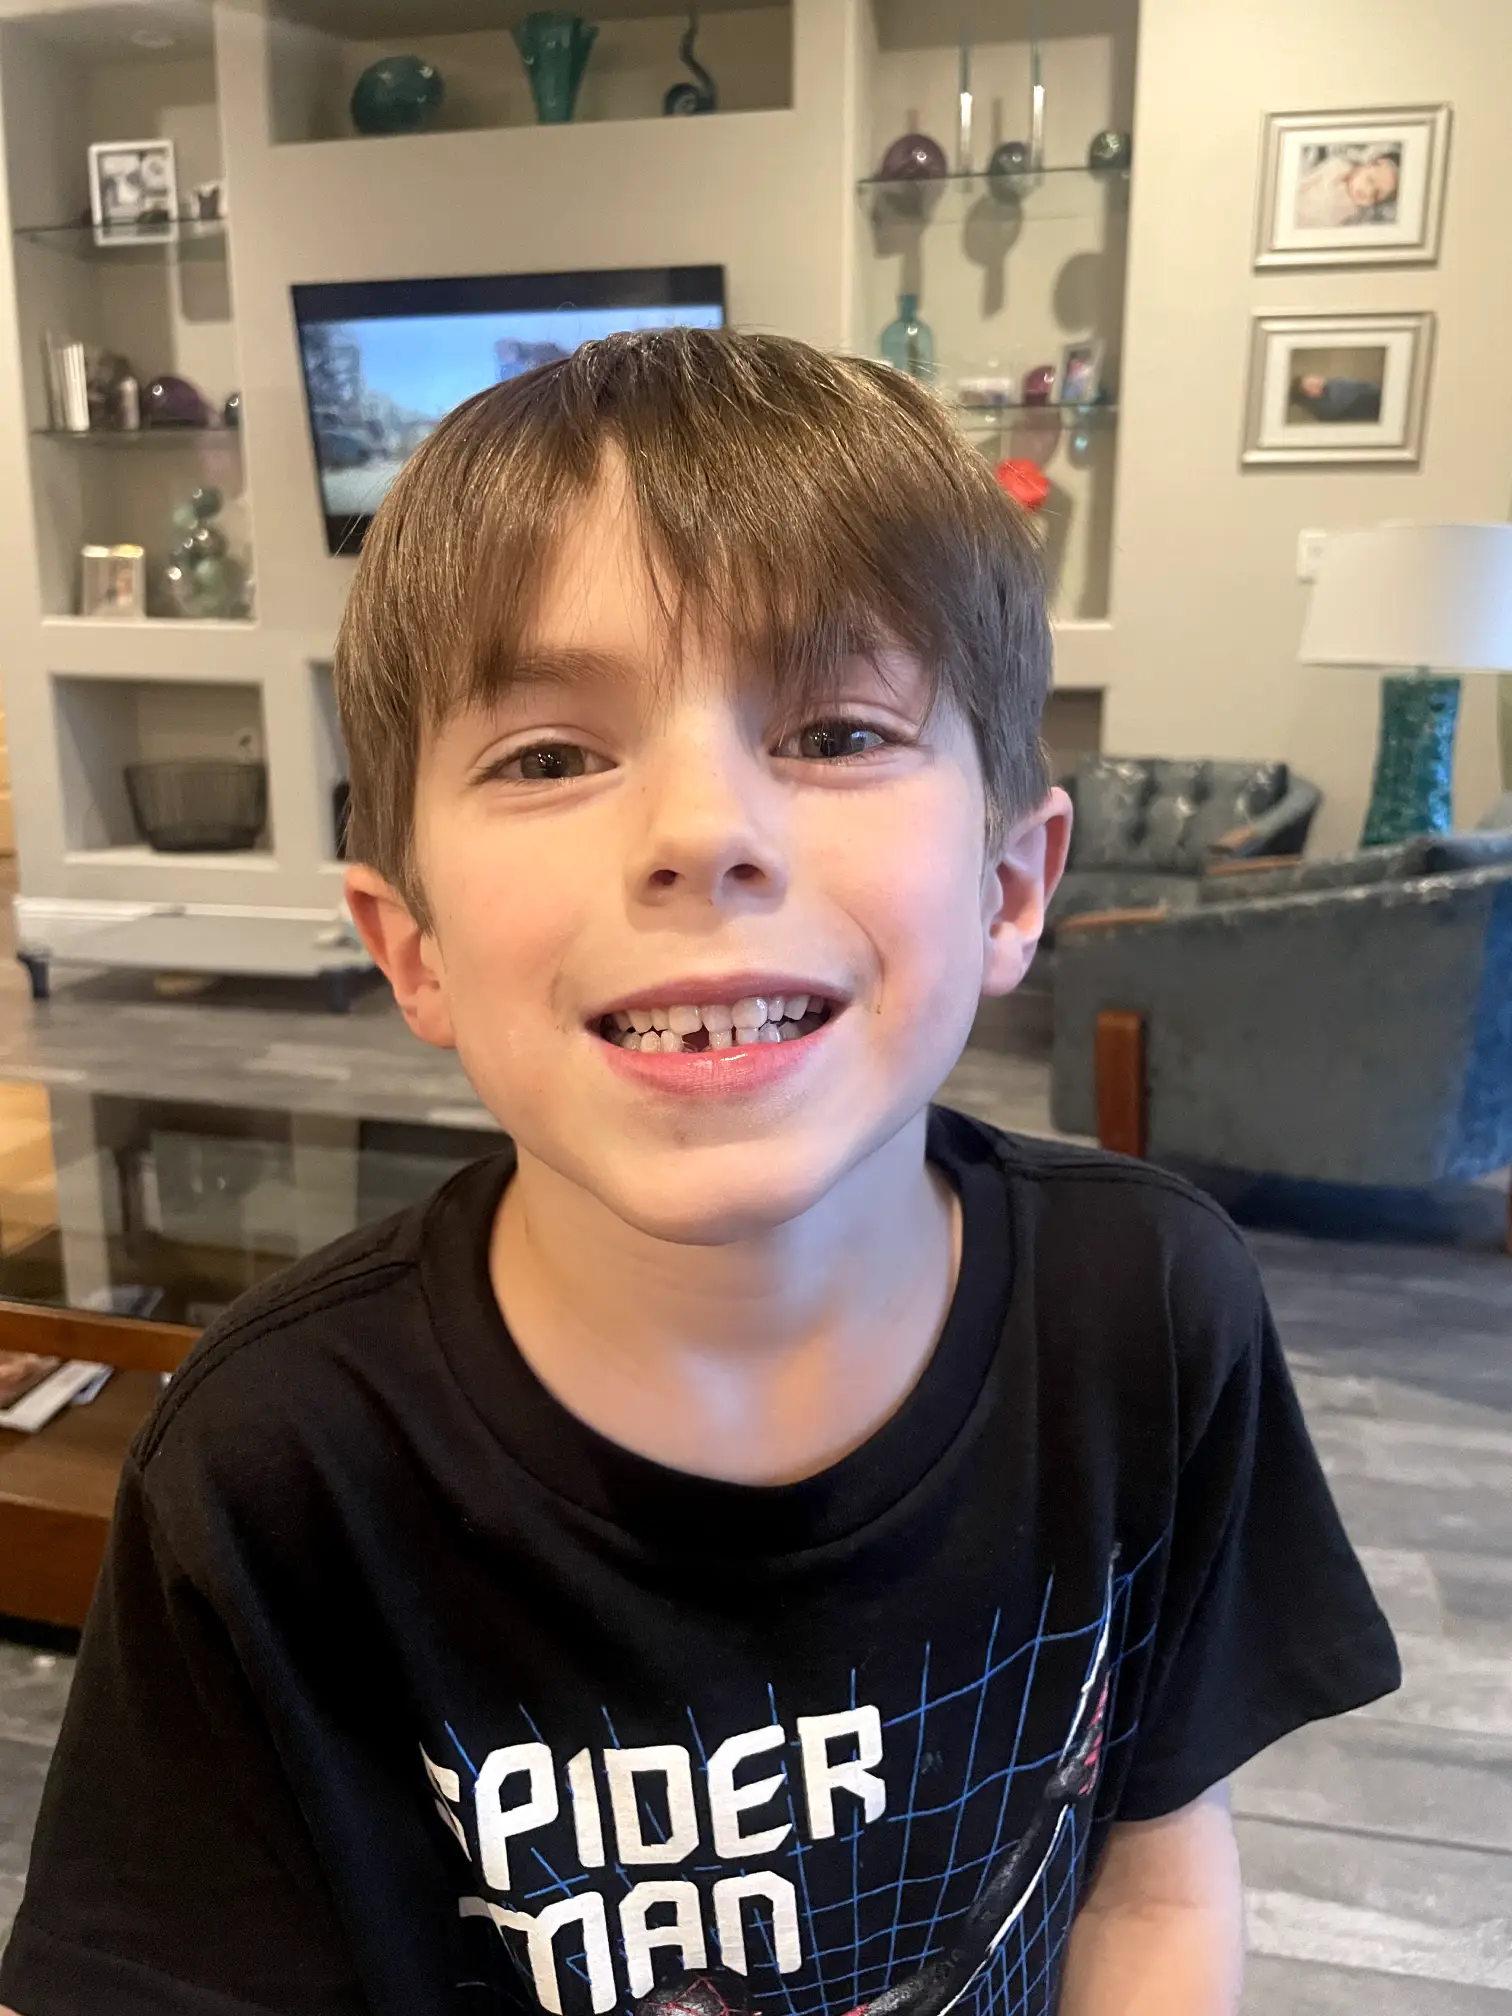 Down one tooth, Ryker, age 6, is flashing his new smile.